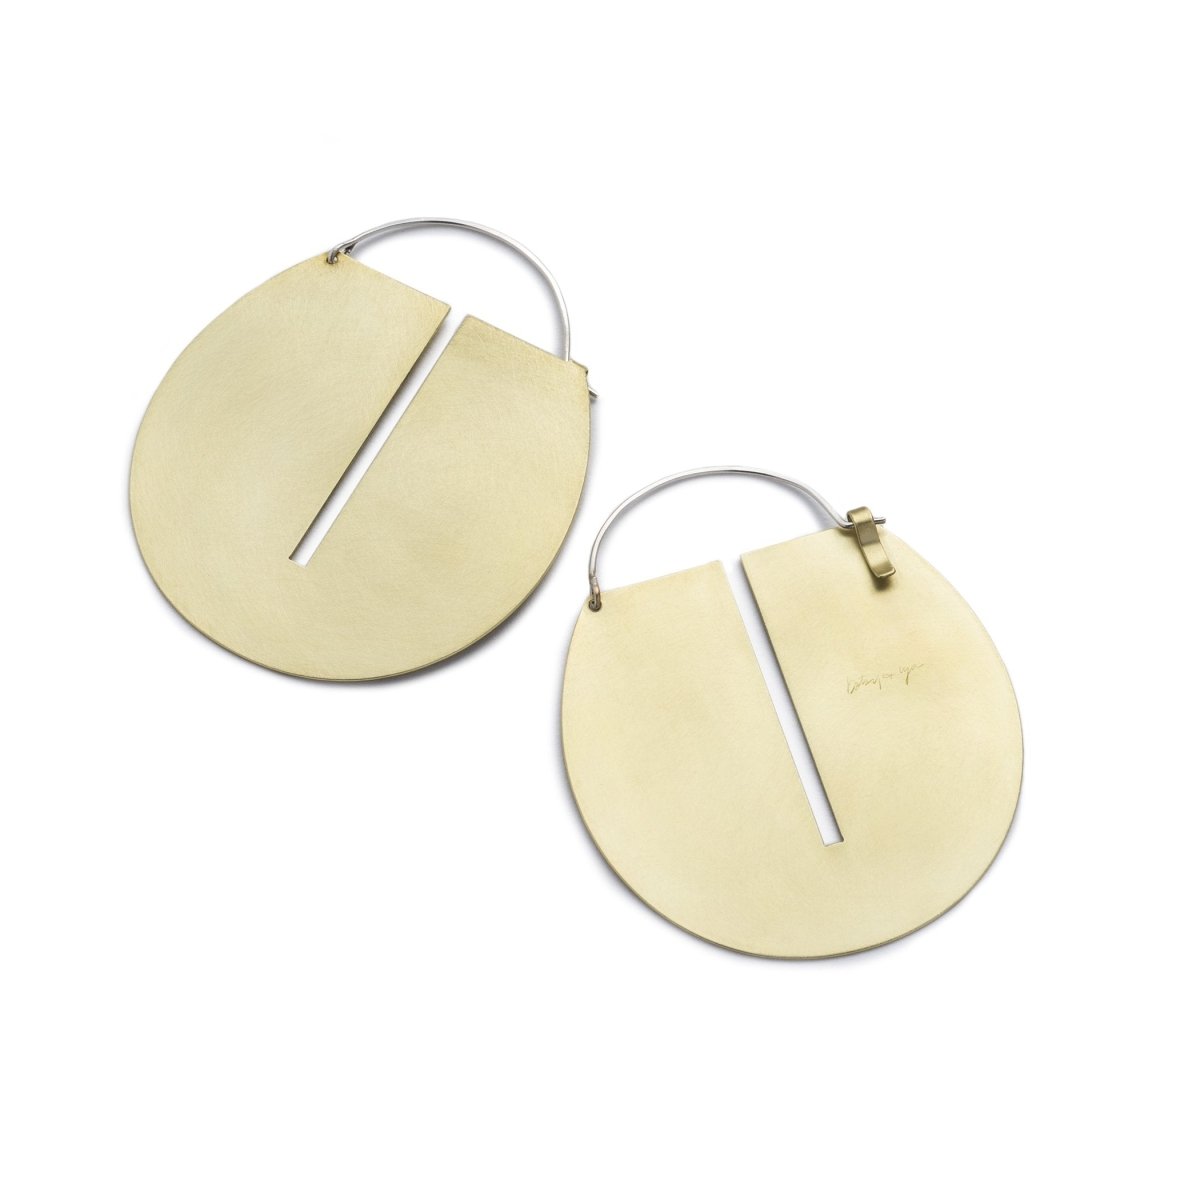 Large, round, brushed brass disc hoop earrings with a thin, rectangular cutout running down the center of the discs, and short, sterling silver earring wires that latch to the back of the discs. Hand-crafted in Portland, Oregon. 